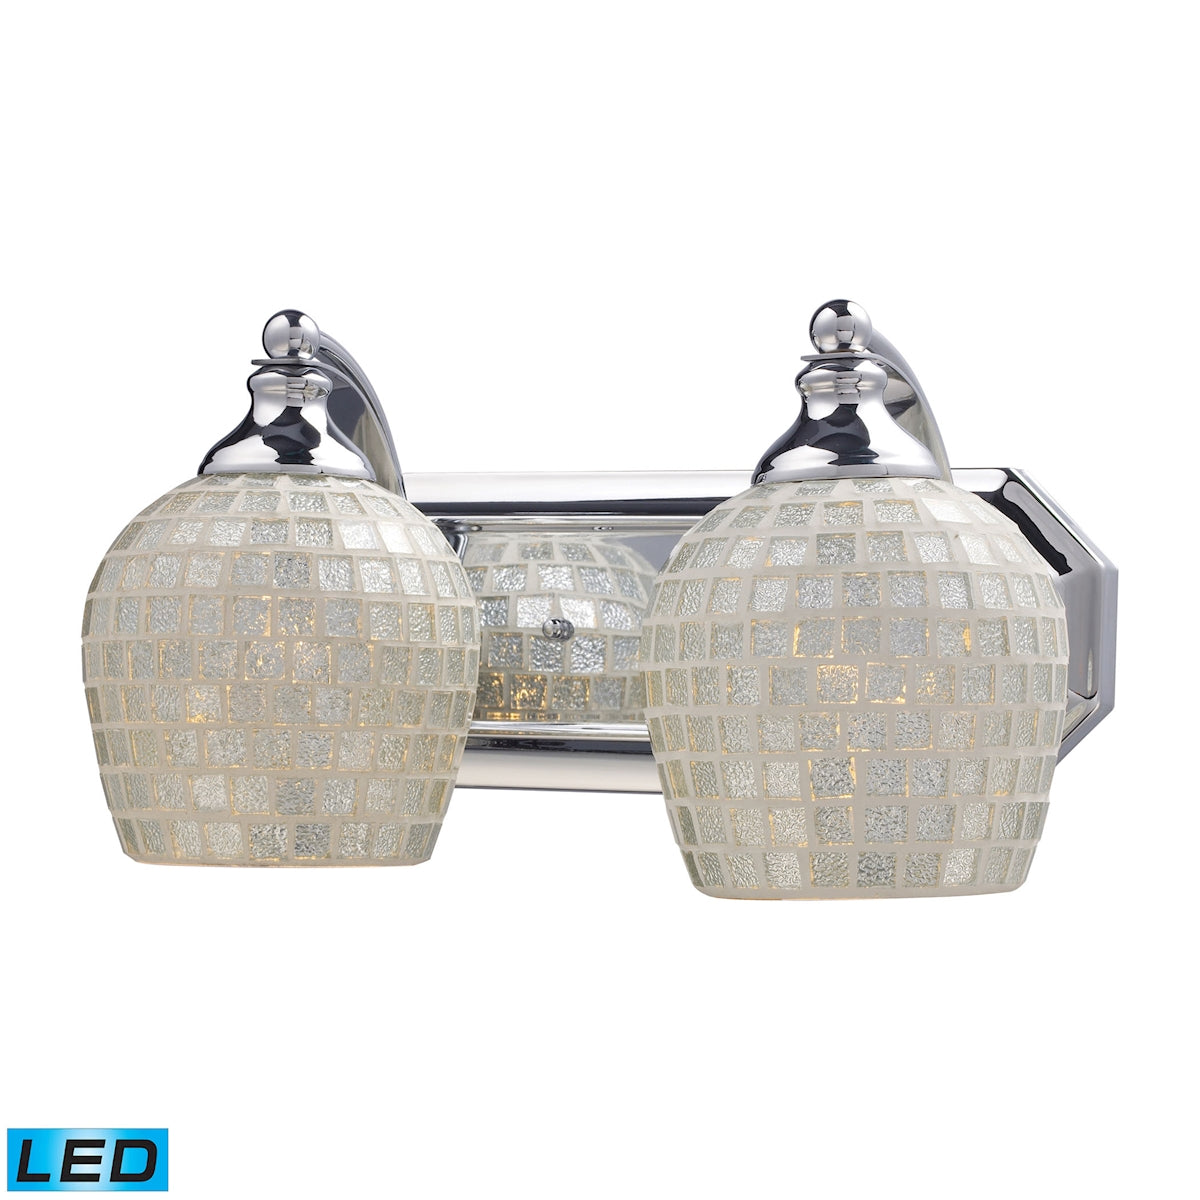 ELK Lighting 570-2C-SLV-LED Mix and Match Vanity 2-Light Wall Lamp in Chrome with Silver Glass - Includes LED Bulbs